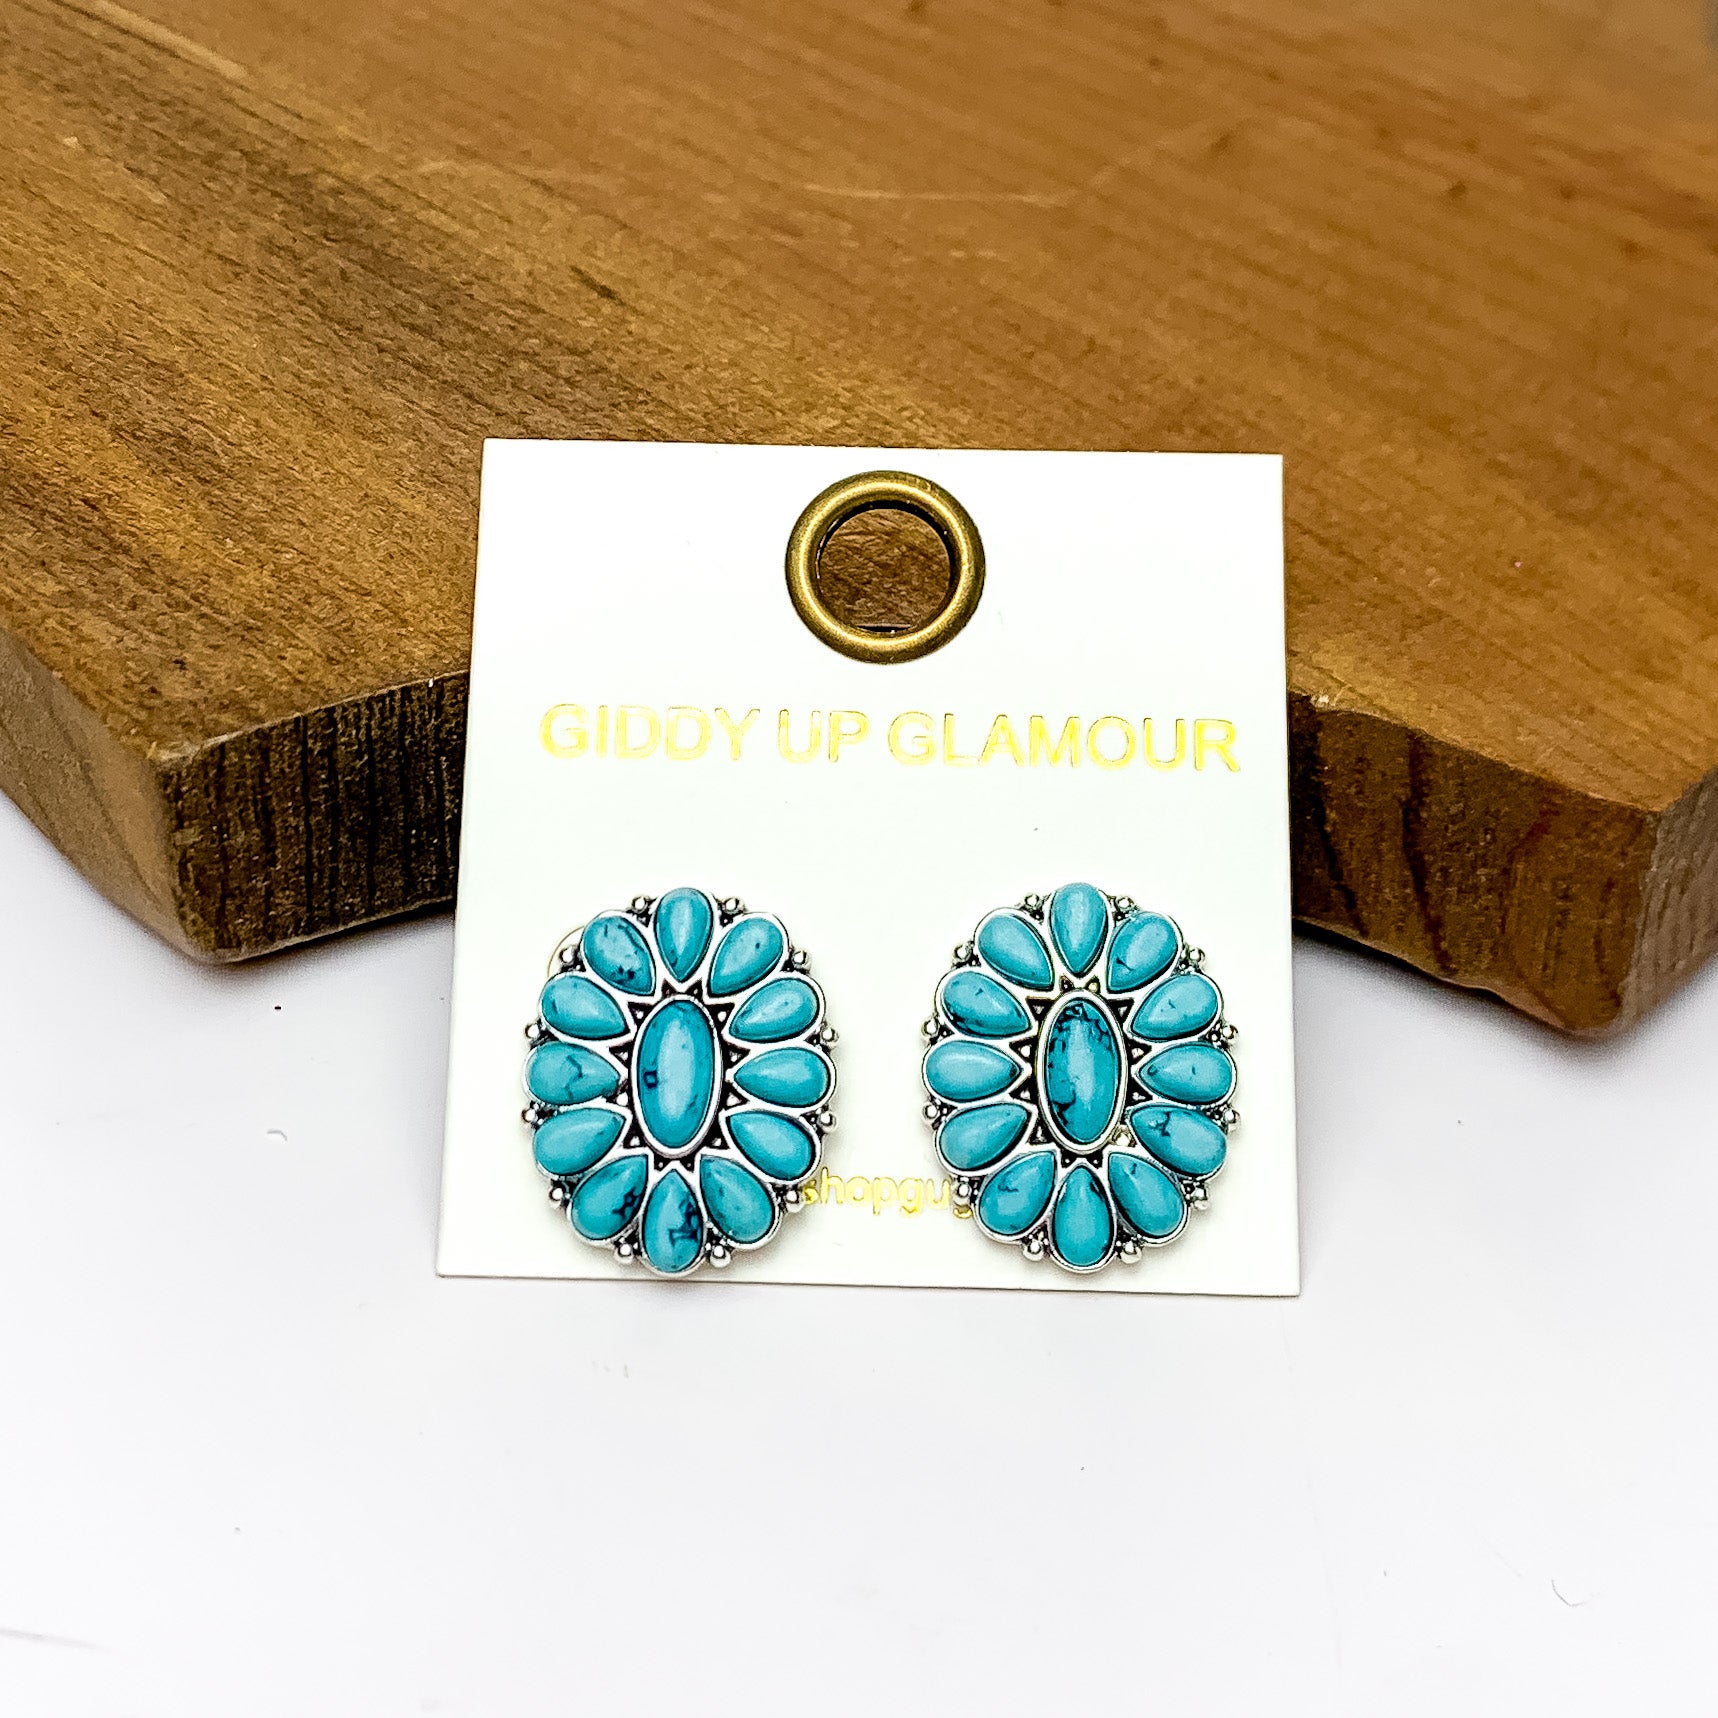 Silver Tone Concho Cluster Oval Earrings in Turquoise. Pictured on a white background with the earrings laying against a wood piece.